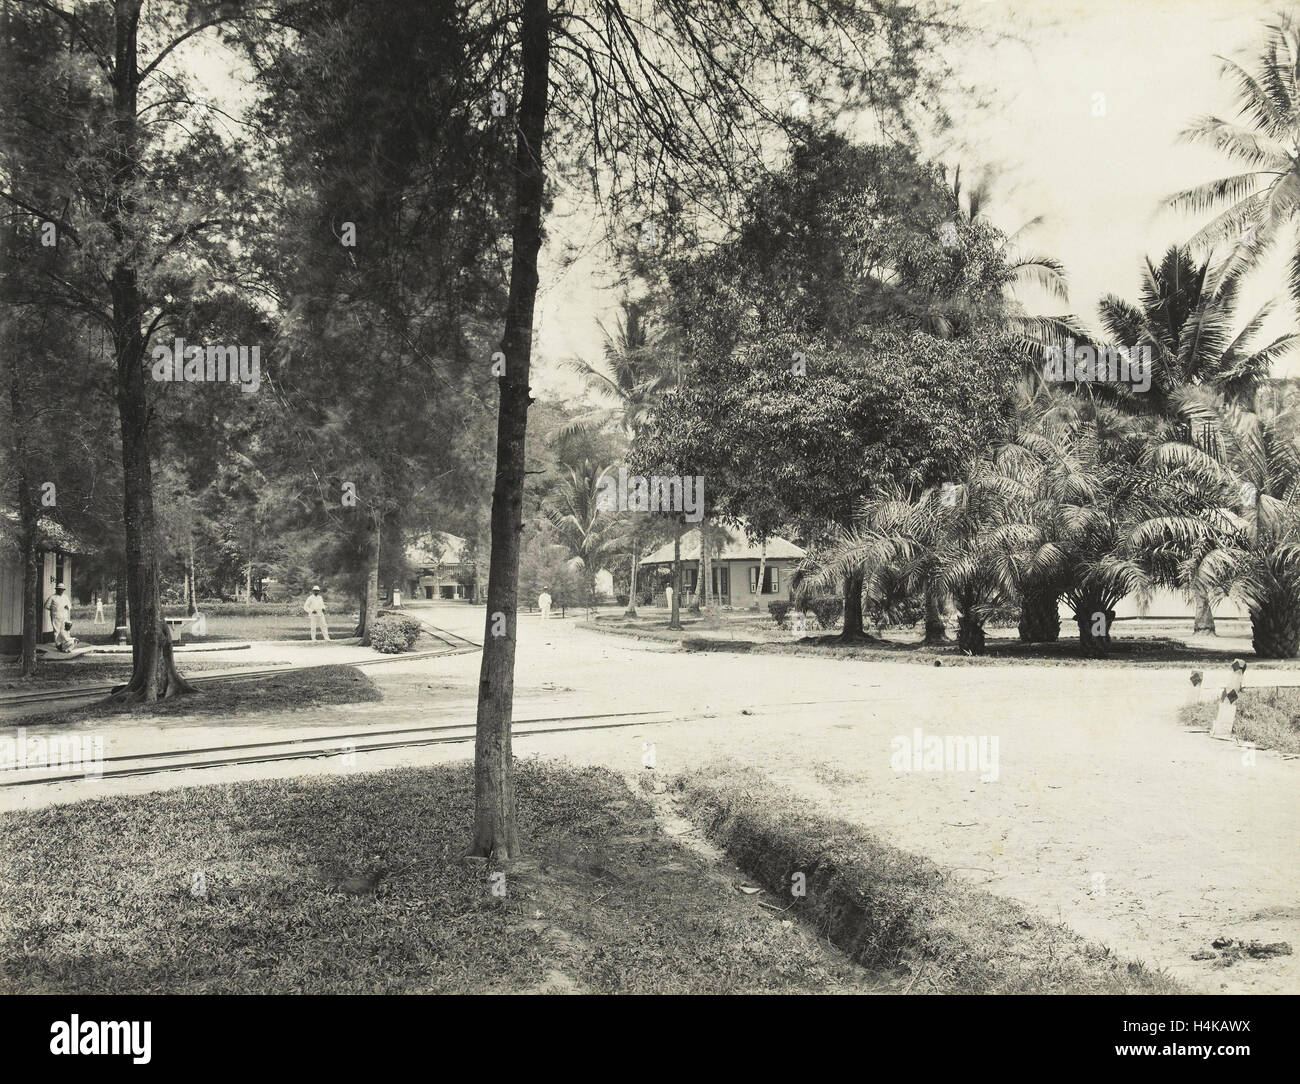 Avenue with trees, houses and Europeans in Indonesia, Carl J. Kleingrothe, 1890 - 1900 Stock Photo